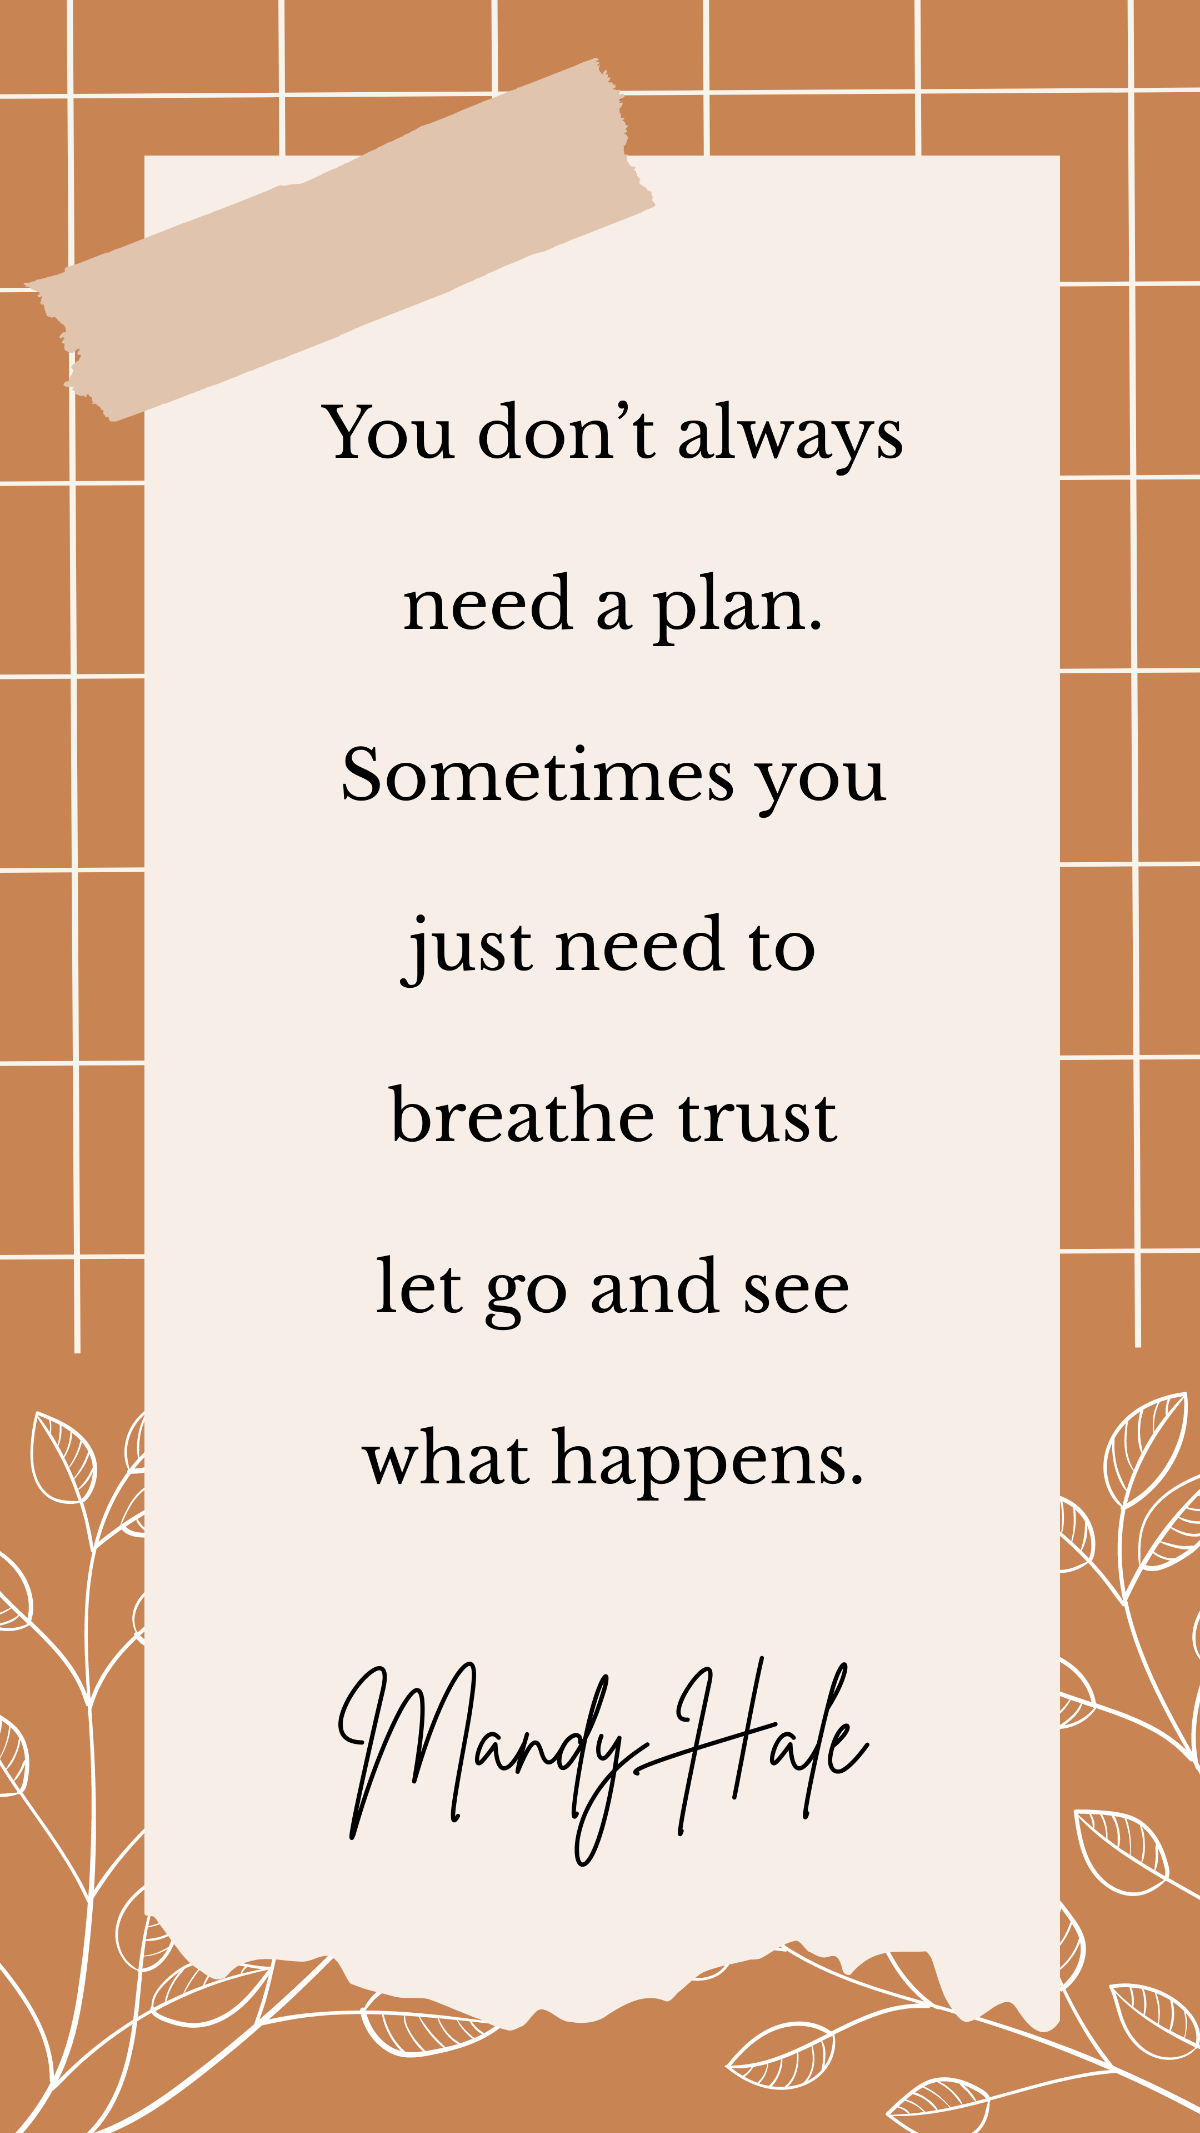 Mandy Hale - You don’t always need a plan. Sometimes you just need to breathe trust let go and see what happens.